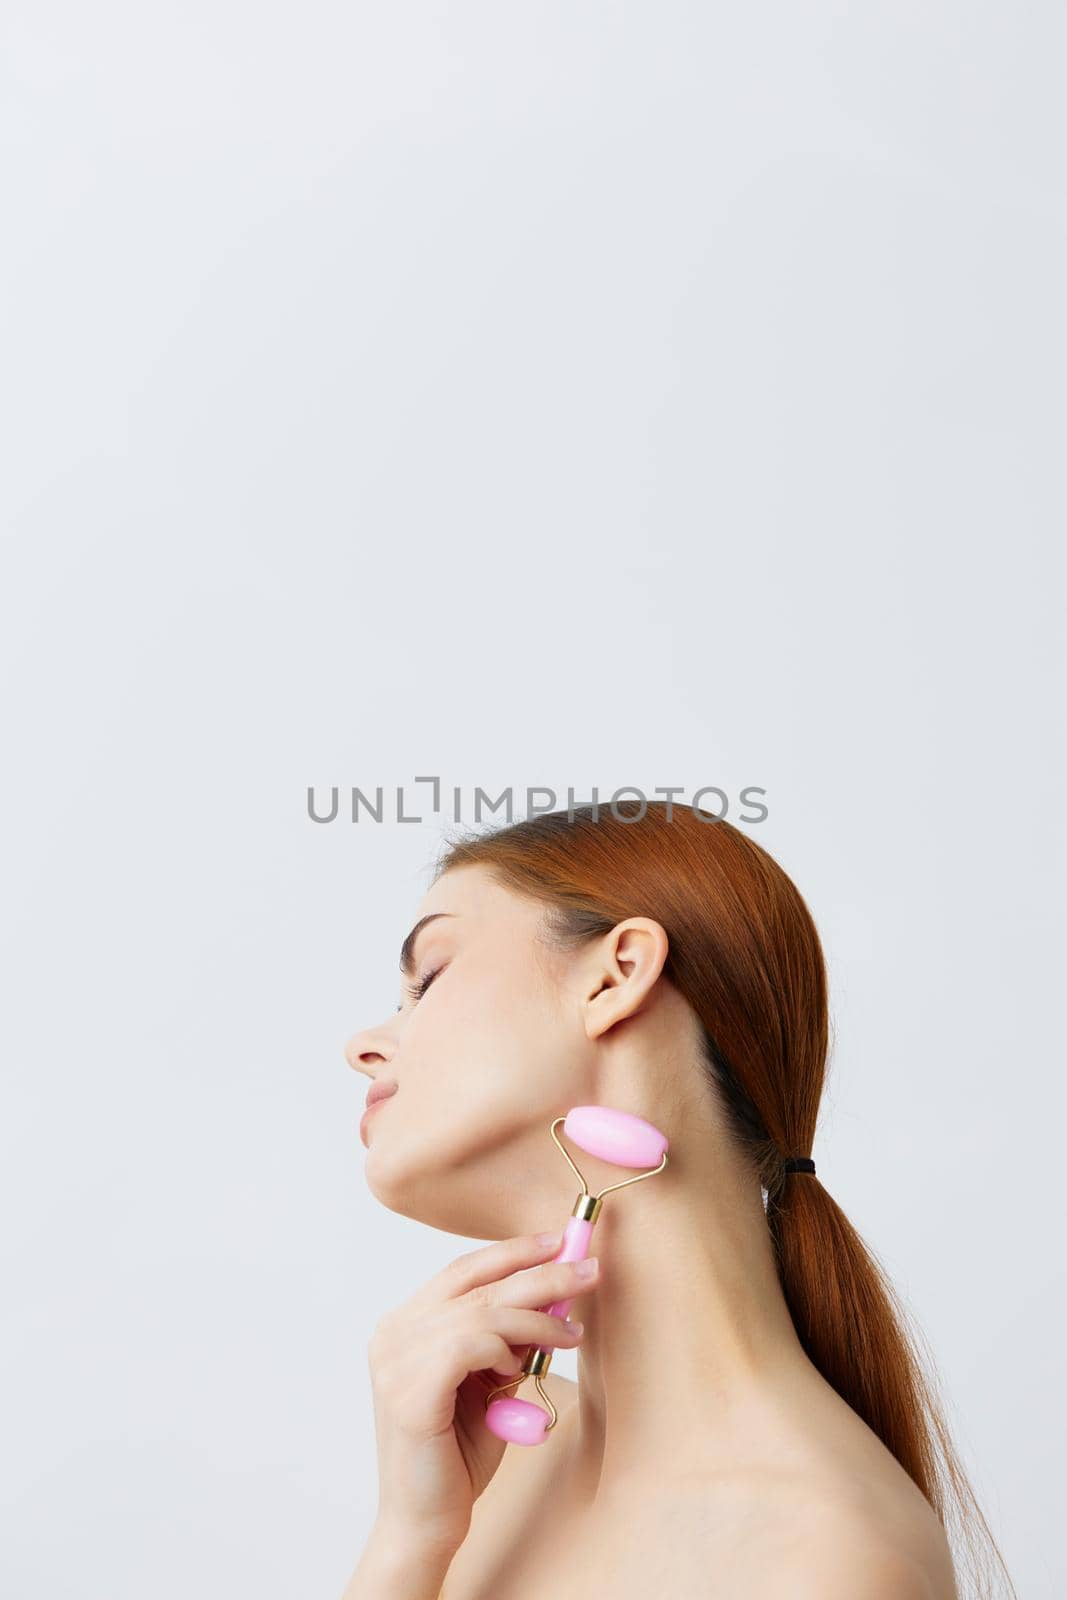 pretty woman pink quartz roller scraper skin care massage bare shoulders isolated background. High quality photo